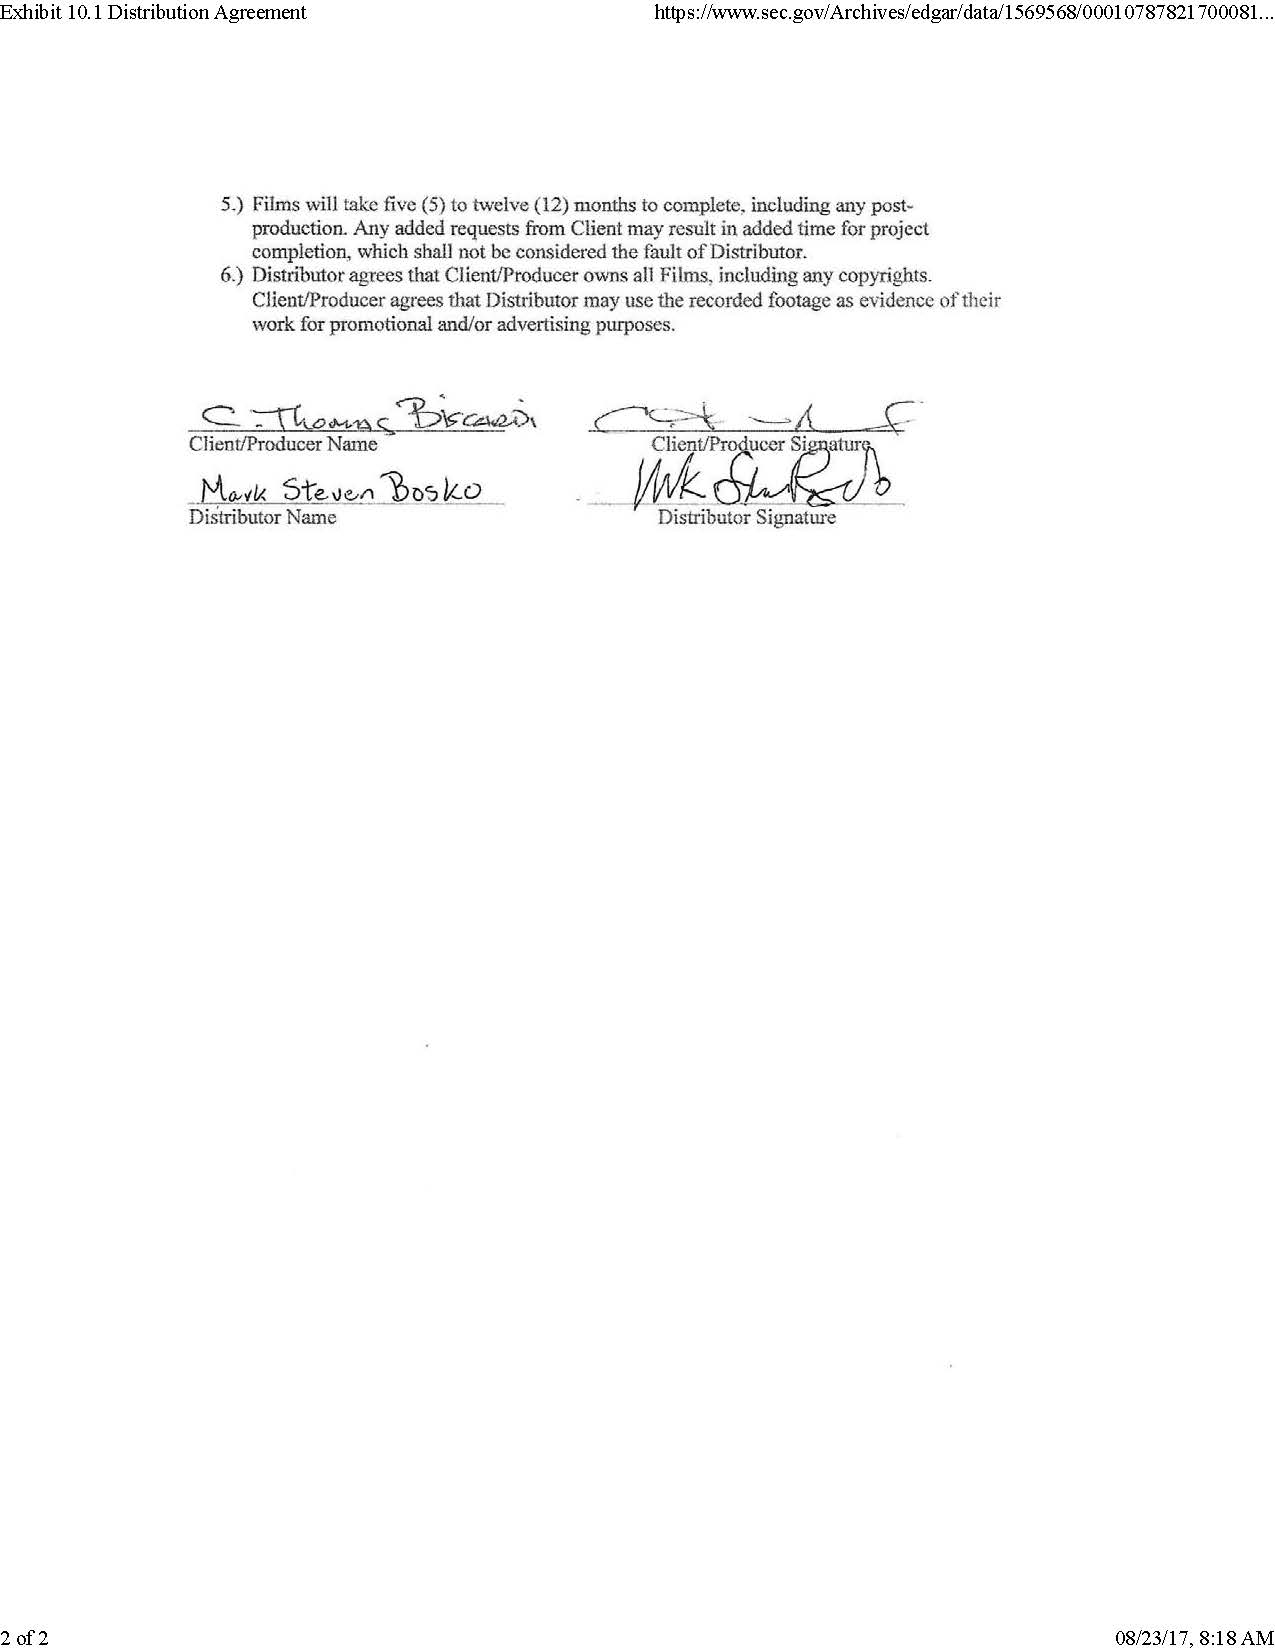 Bosko Group LLC Dark Side contract signed_Page_2.jpg